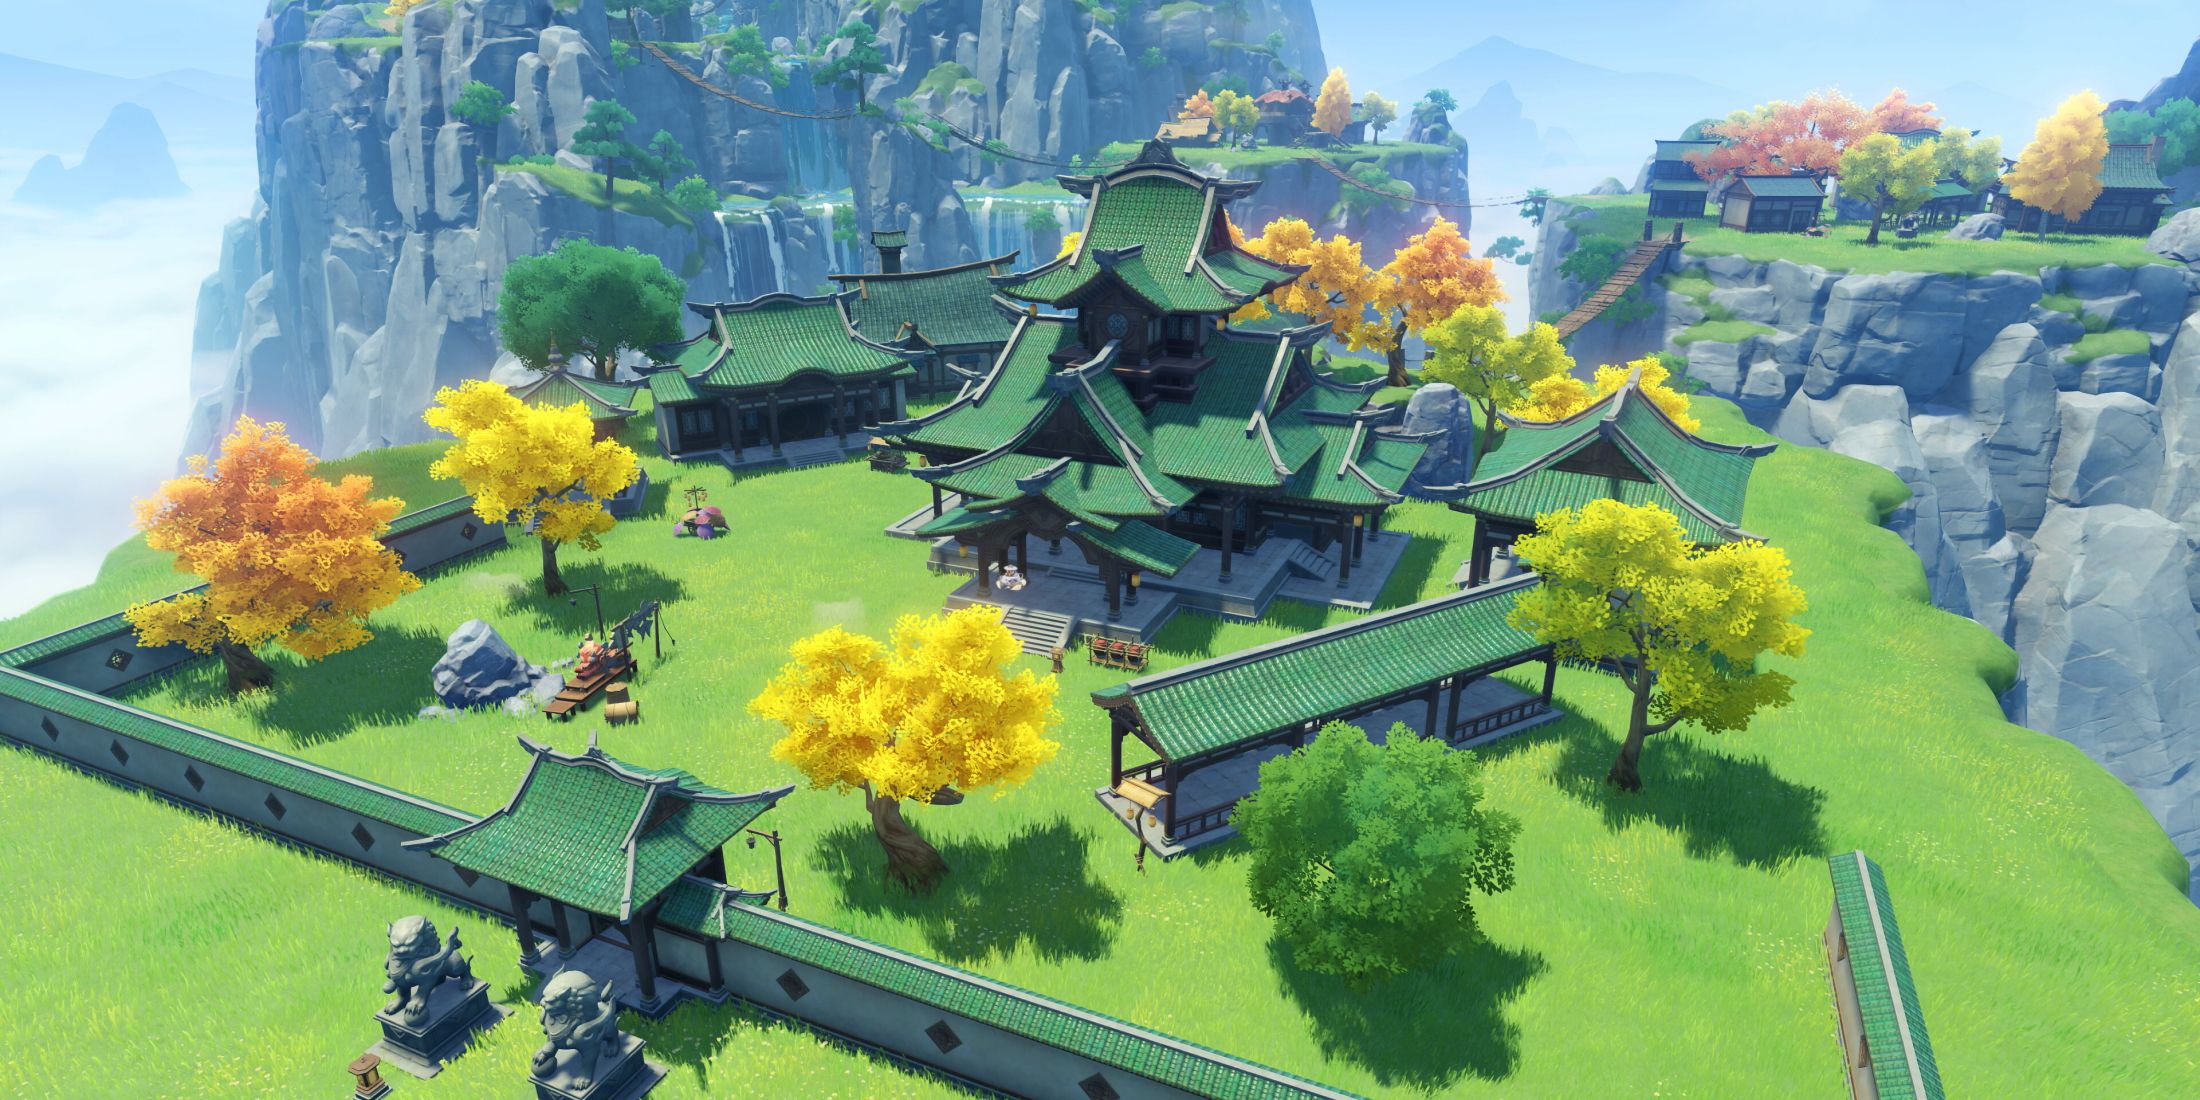 Genshin Impact's in-game Serenitea Pot housing system, showing a home in the Liyue realm.